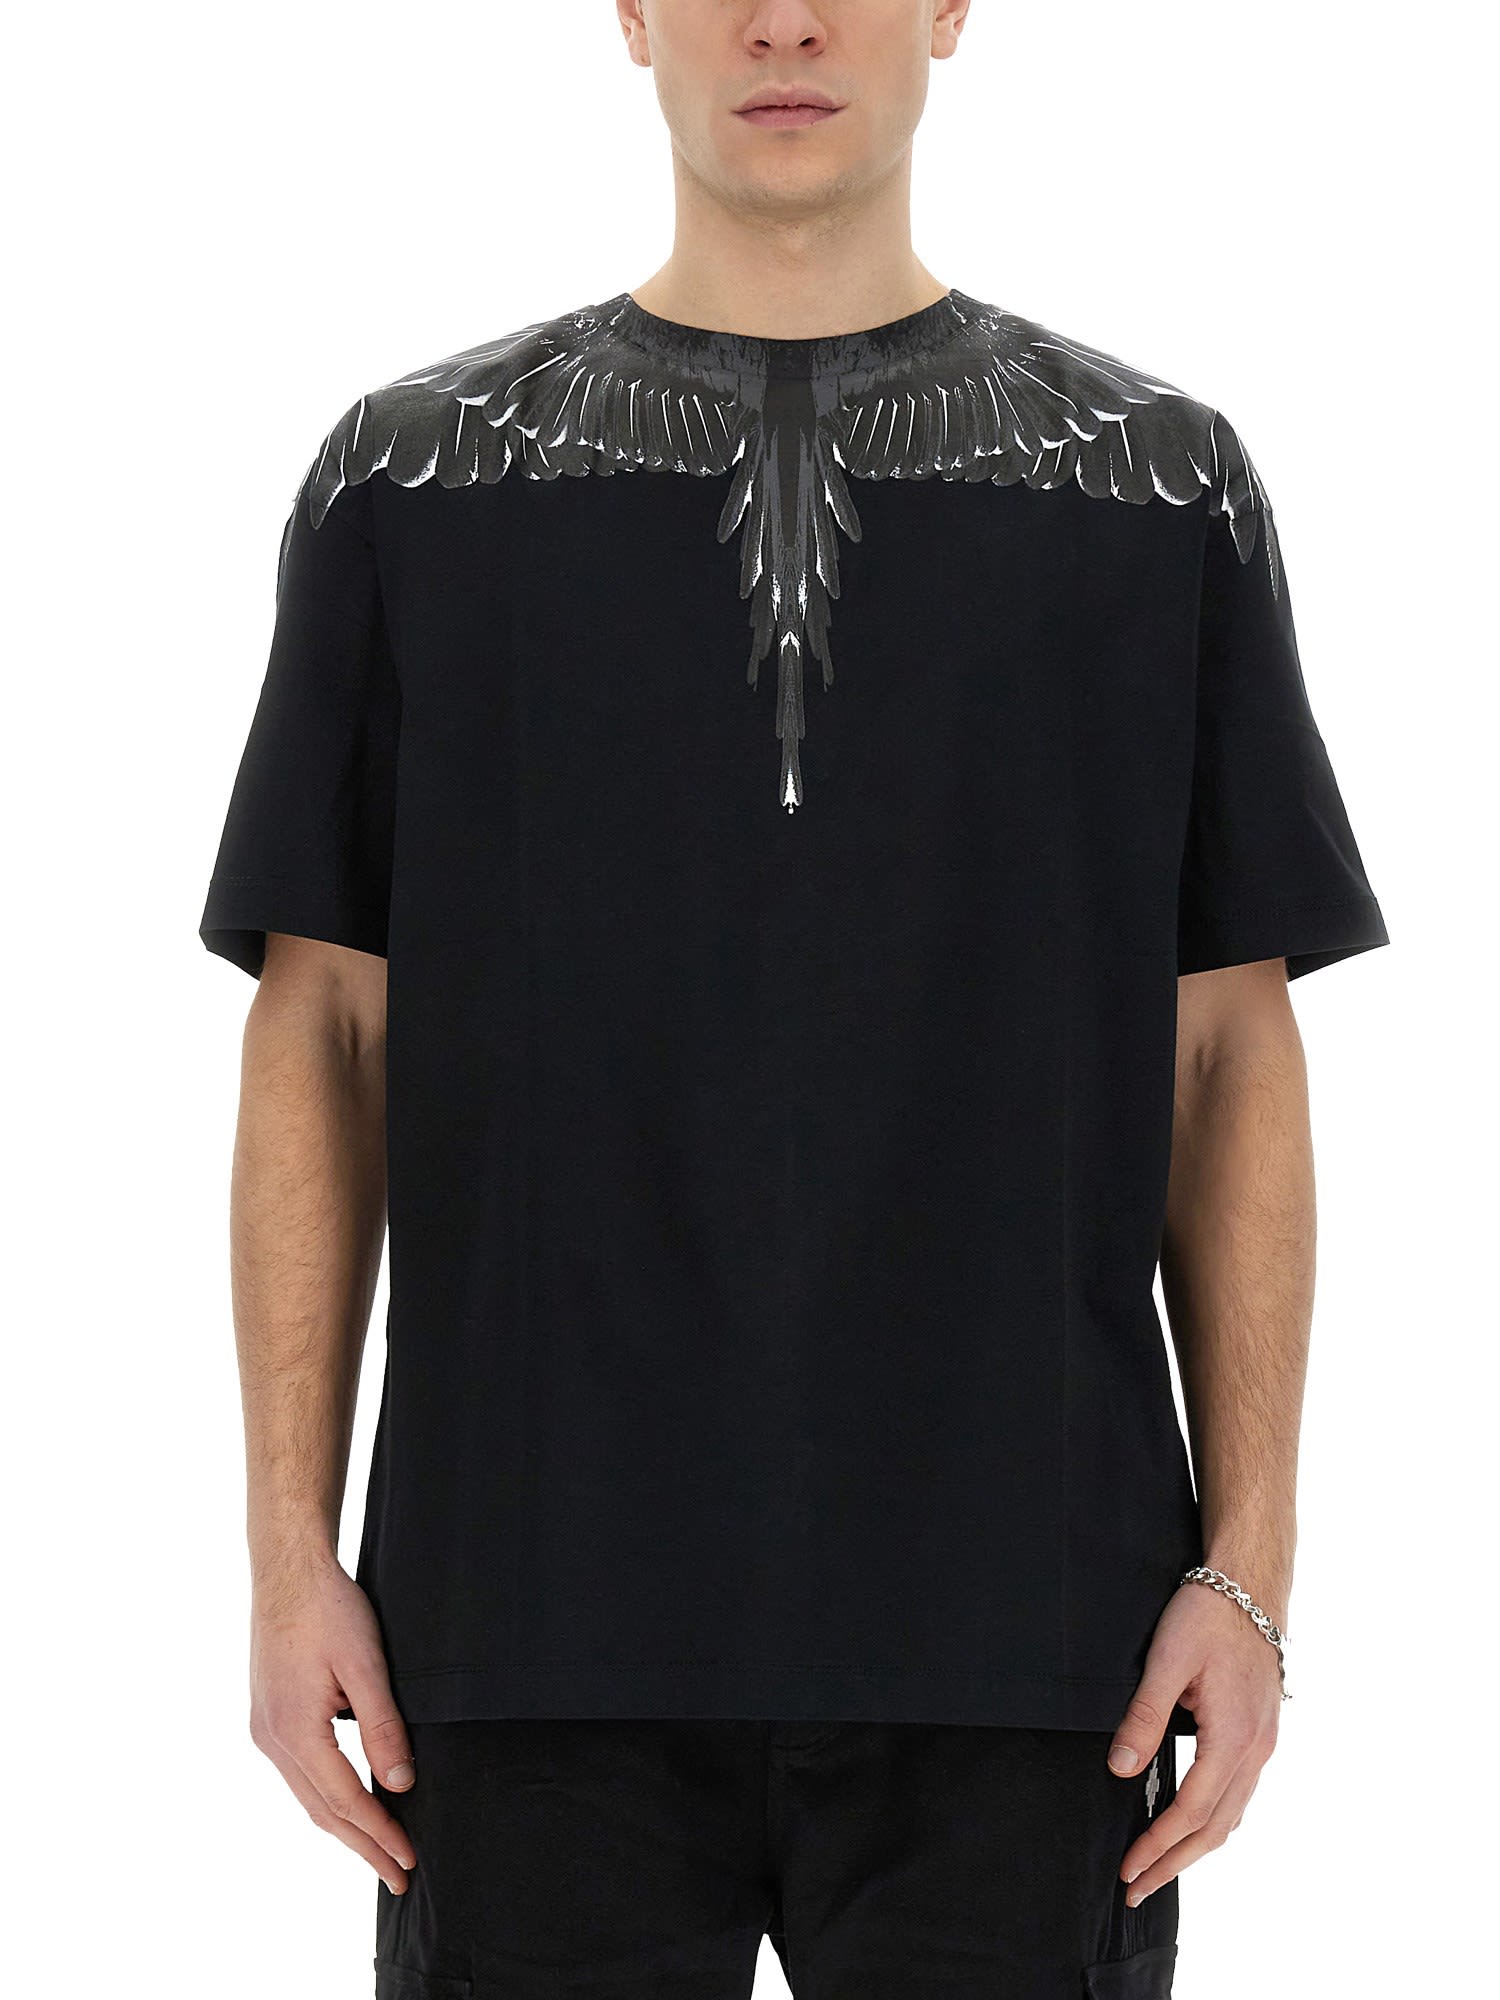 MARCELO BURLON COUNTY OF MILAN T-SHIRT WITH ICON WINGS PRINT